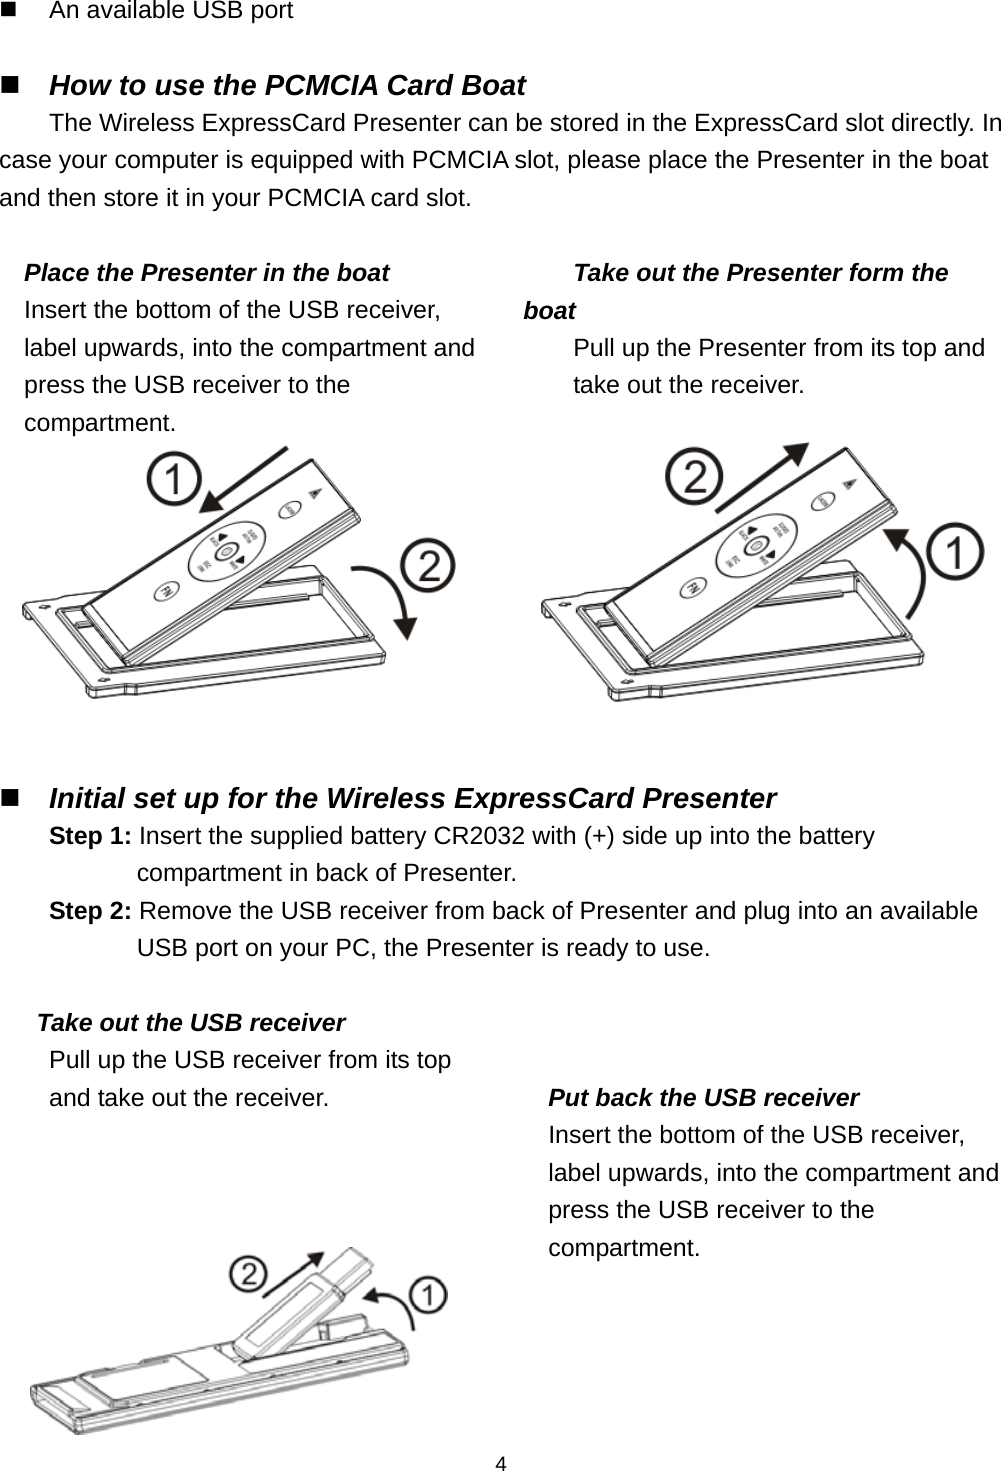    4  An available USB port   How to use the PCMCIA Card Boat The Wireless ExpressCard Presenter can be stored in the ExpressCard slot directly. In case your computer is equipped with PCMCIA slot, please place the Presenter in the boat and then store it in your PCMCIA card slot.  Place the Presenter in the boat Insert the bottom of the USB receiver, label upwards, into the compartment and press the USB receiver to the compartment.  Take out the Presenter form the boat Pull up the Presenter from its top and take out the receiver.      Initial set up for the Wireless ExpressCard Presenter Step 1: Insert the supplied battery CR2032 with (+) side up into the battery compartment in back of Presenter. Step 2: Remove the USB receiver from back of Presenter and plug into an available USB port on your PC, the Presenter is ready to use.  Take out the USB receiver Pull up the USB receiver from its top and take out the receiver.       Put back the USB receiver Insert the bottom of the USB receiver, label upwards, into the compartment and press the USB receiver to the compartment.  